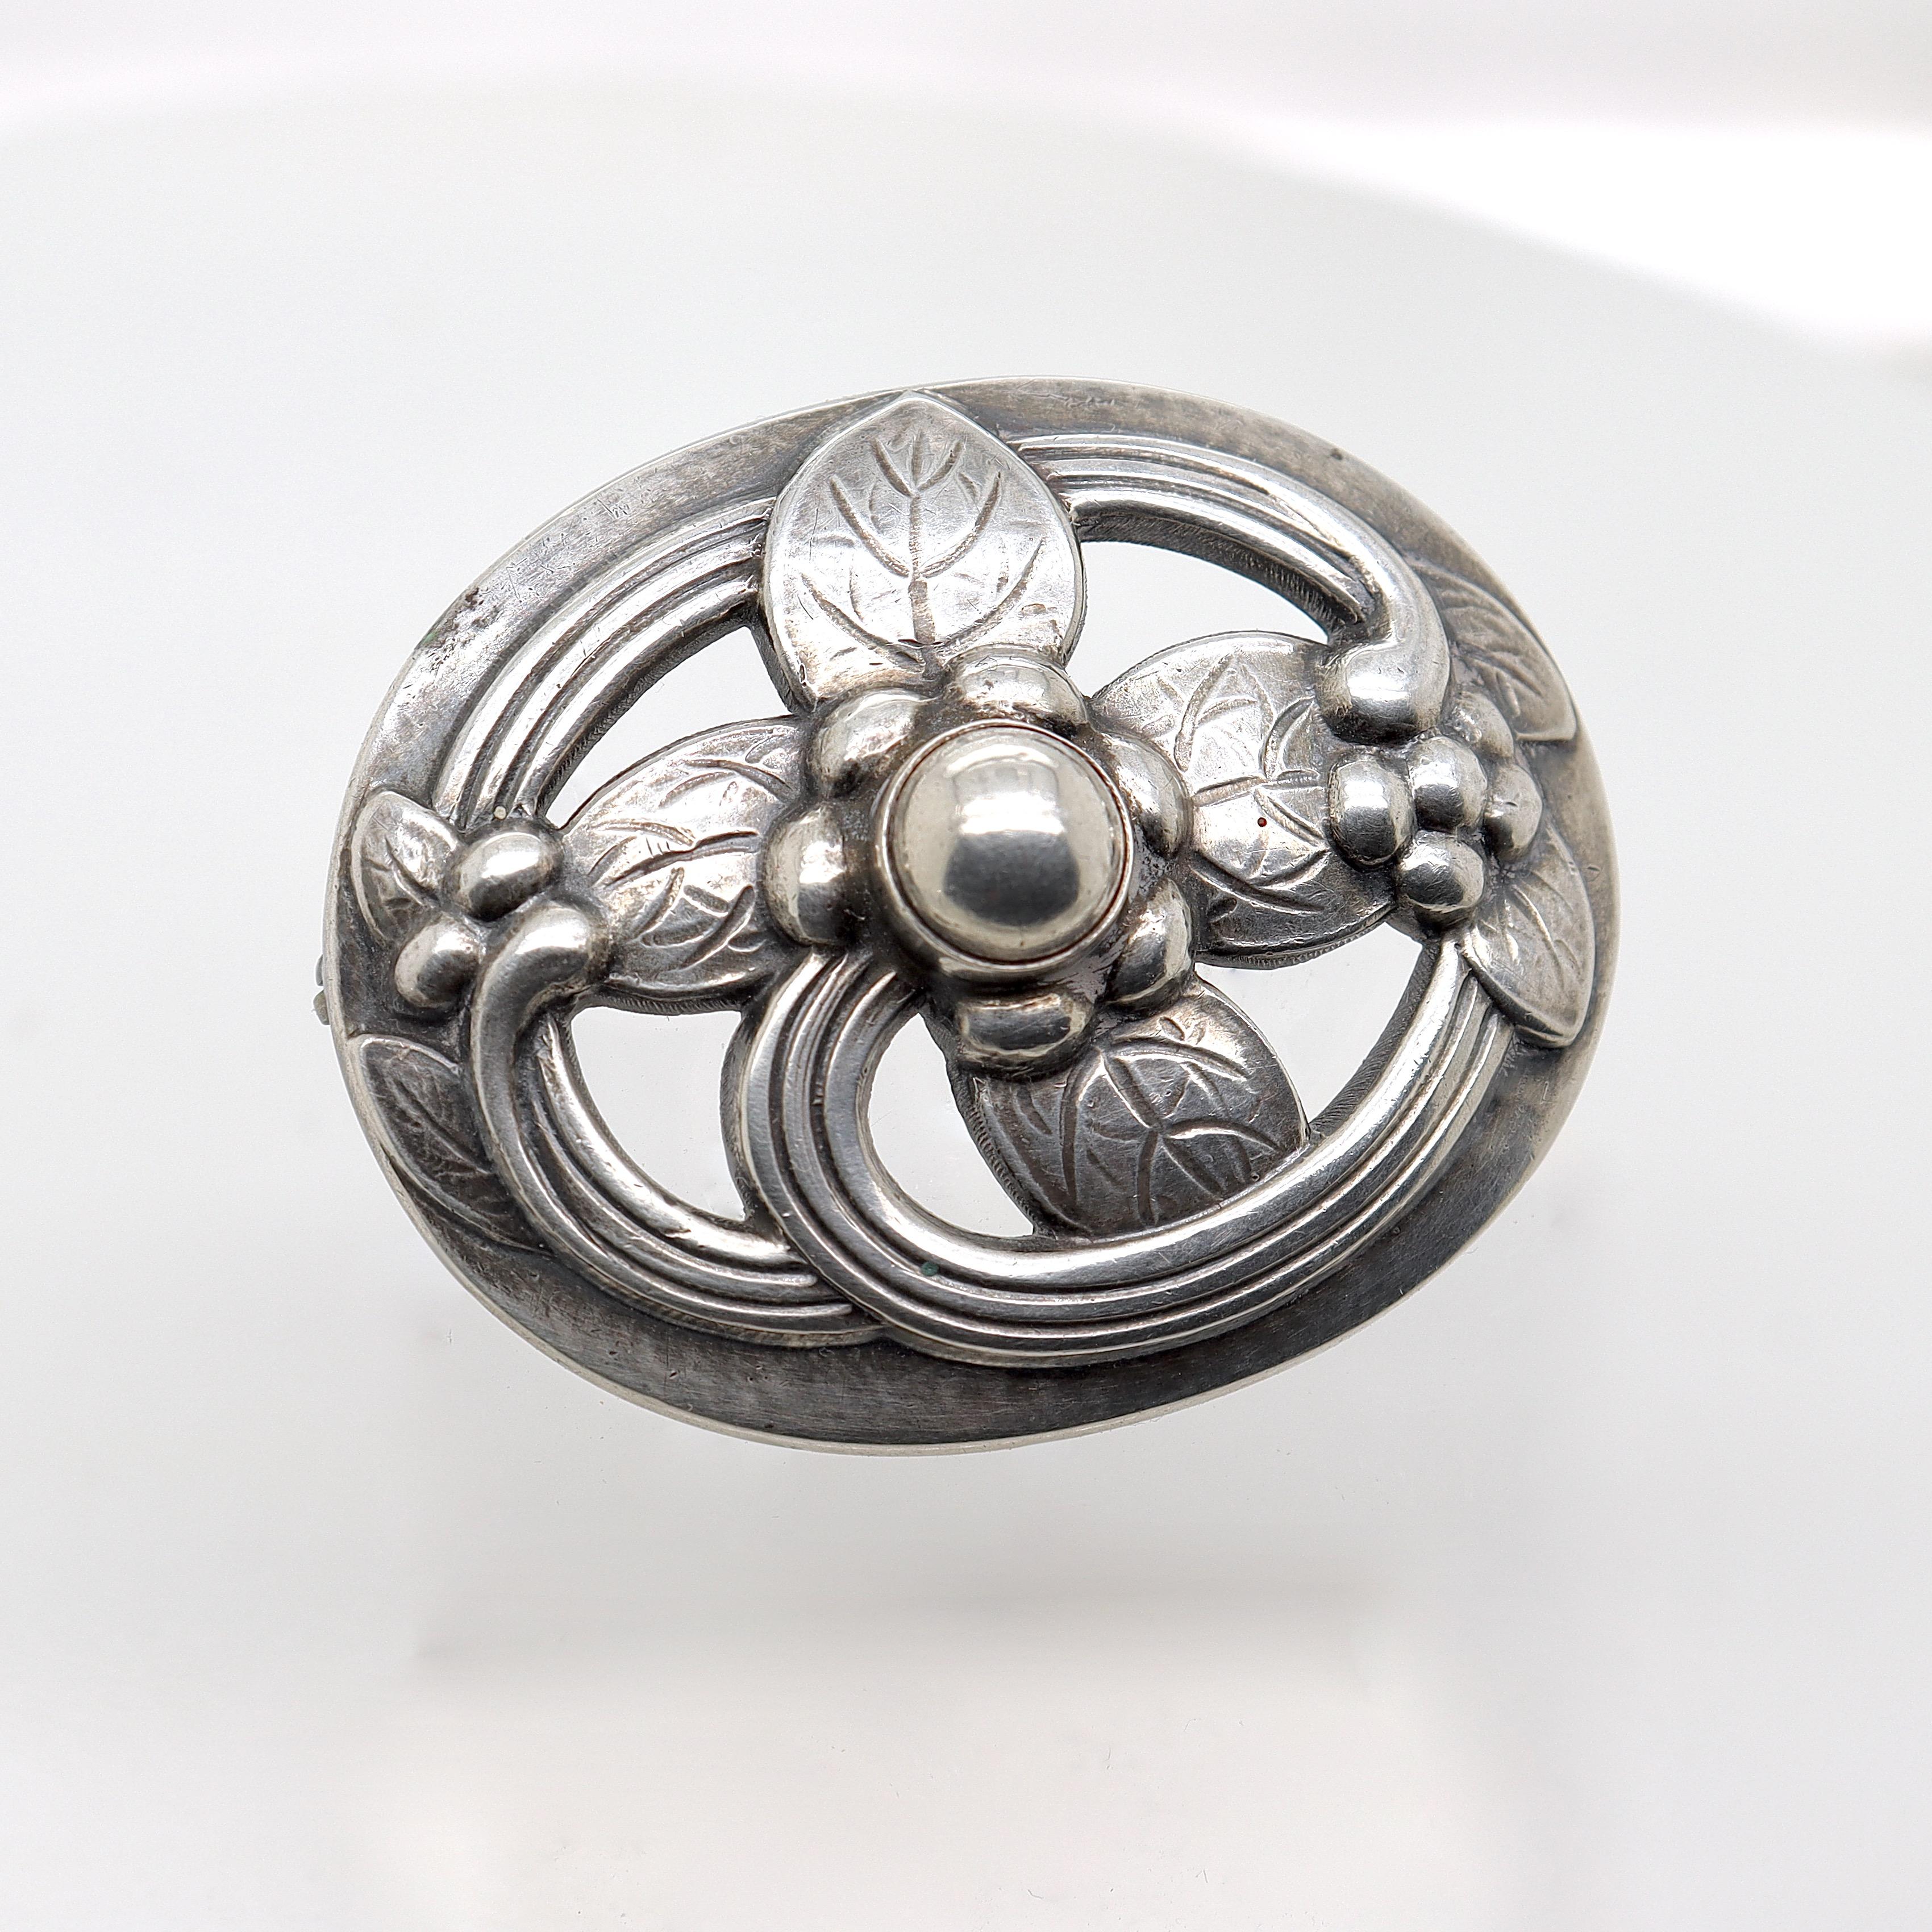 A fine Georg Jensen sterling silver pin or brooch.

Model no. 138.

Designed by Georg Jensen.

In the form of a hand-hammered, stylized flower set inside an oval.

Simply a wonderful brooch from Denmark's premier silversmiths!